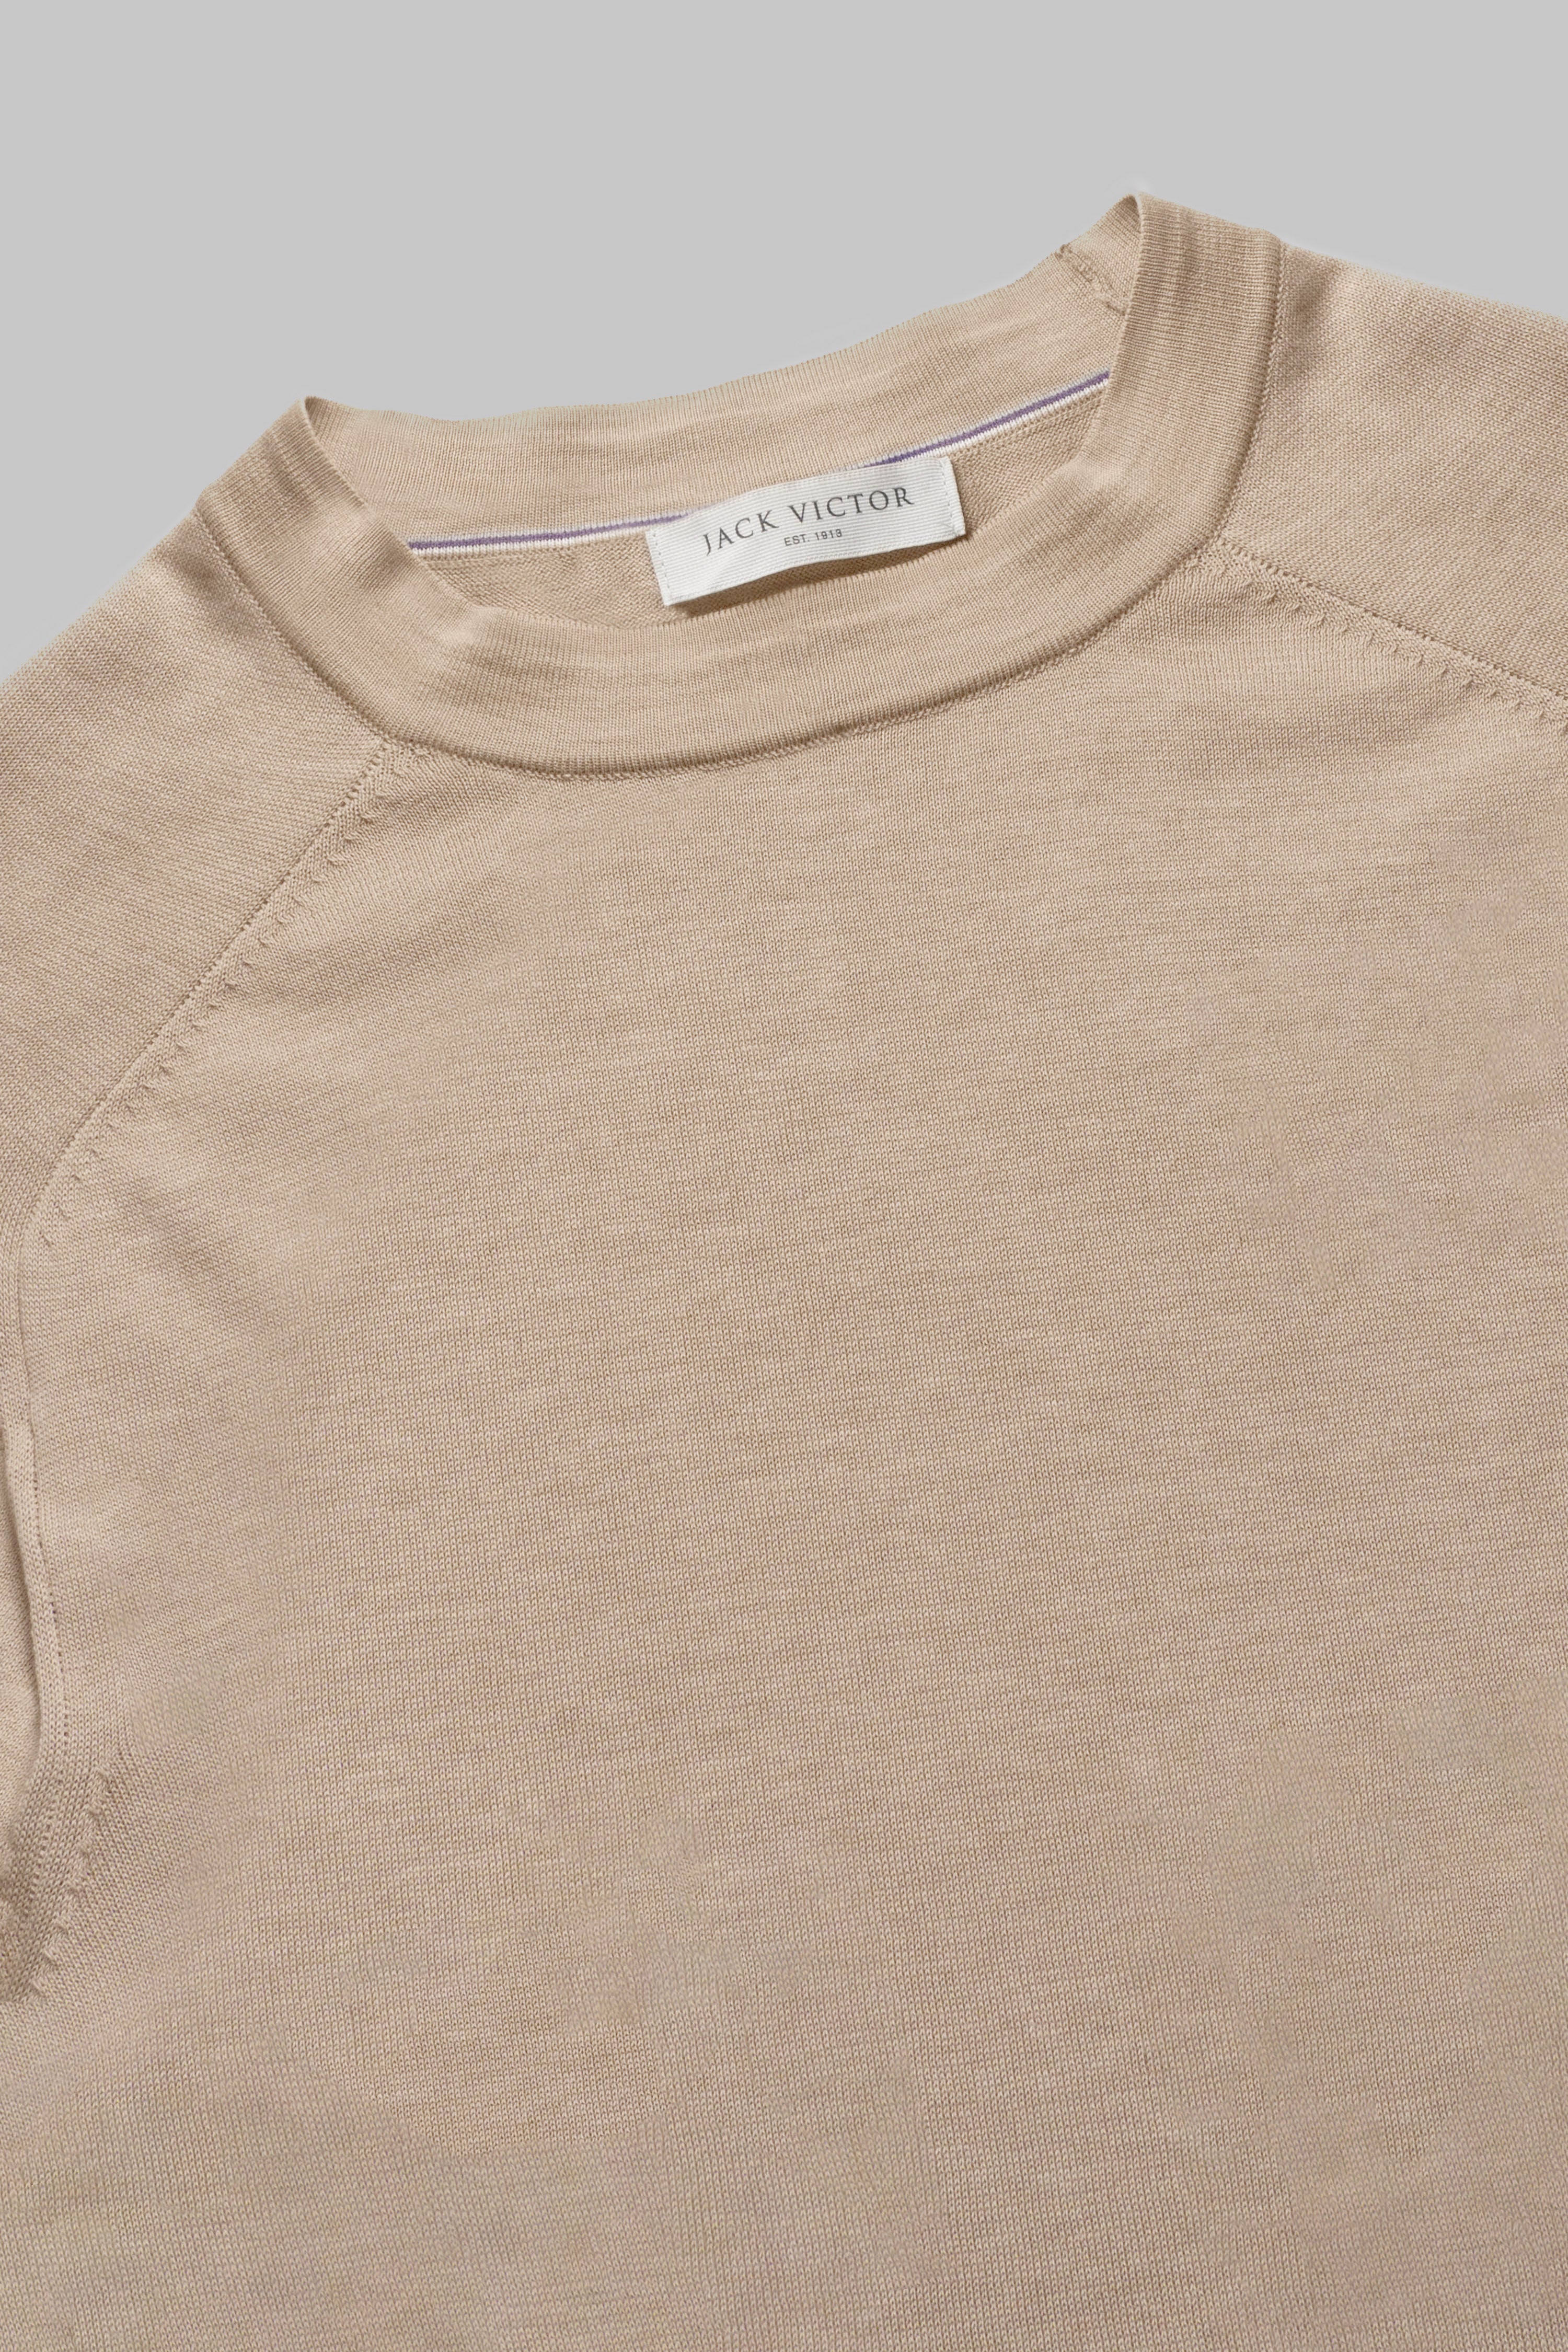 Alt view 1 SetiCo Cotton and Silk Knit Crew Neck in Tan